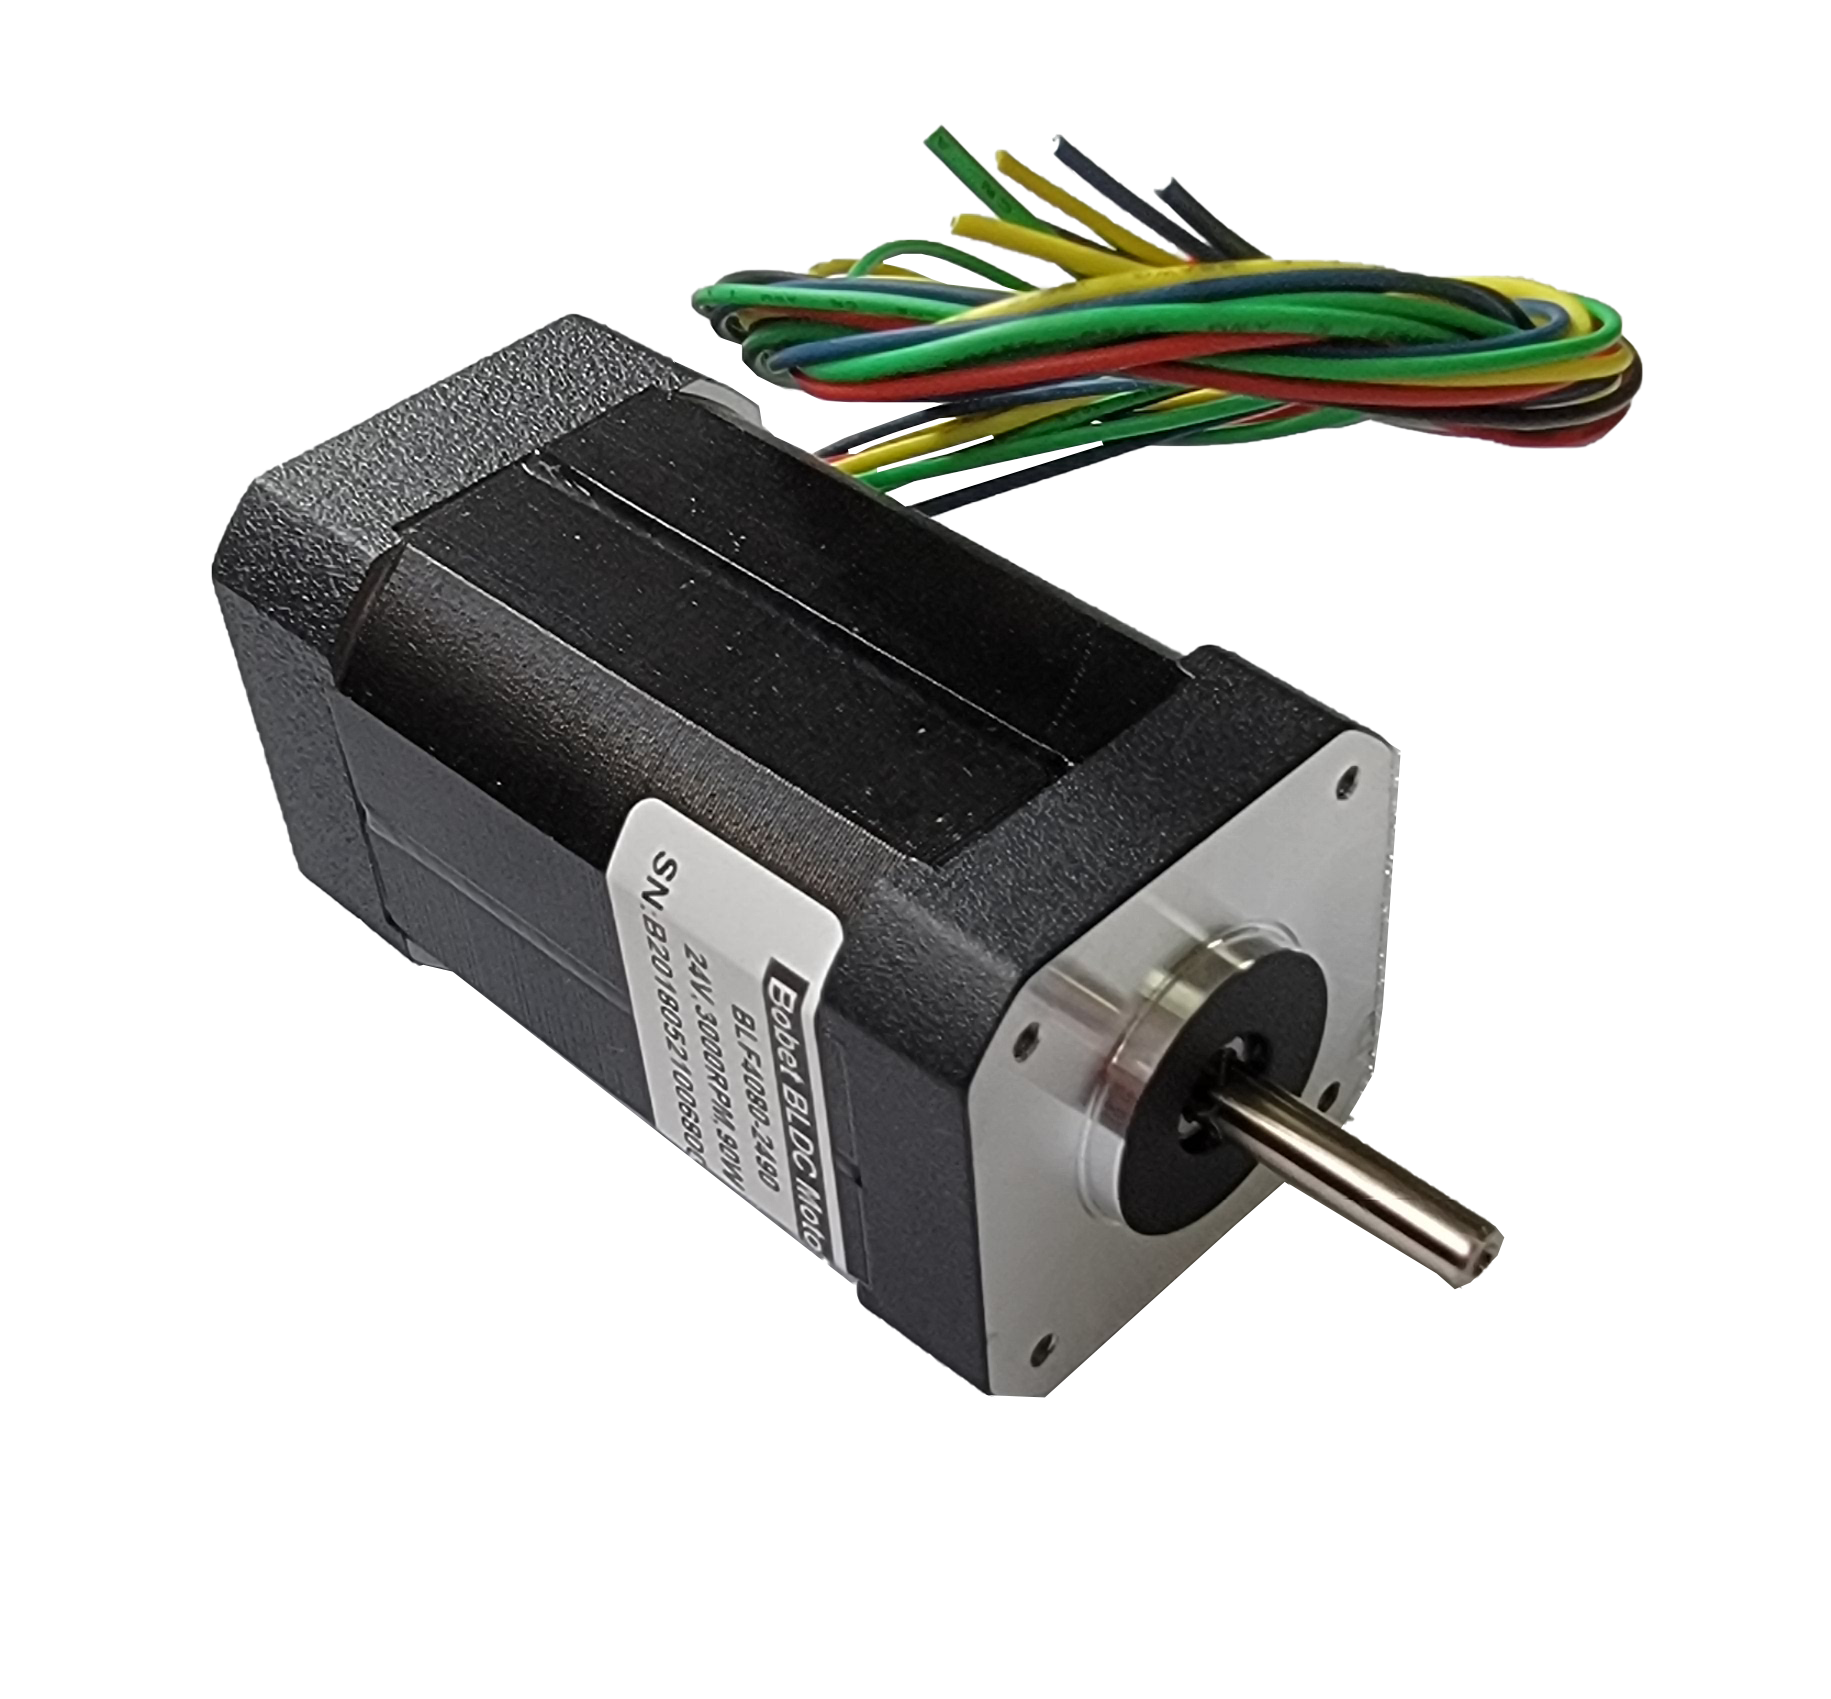 Two-Stage Gear Motor factory –  Shenzhen factory BLDC 24v 77.5w motor with 4000rpm rated speed and 1850g.cm rated torque – Bobet